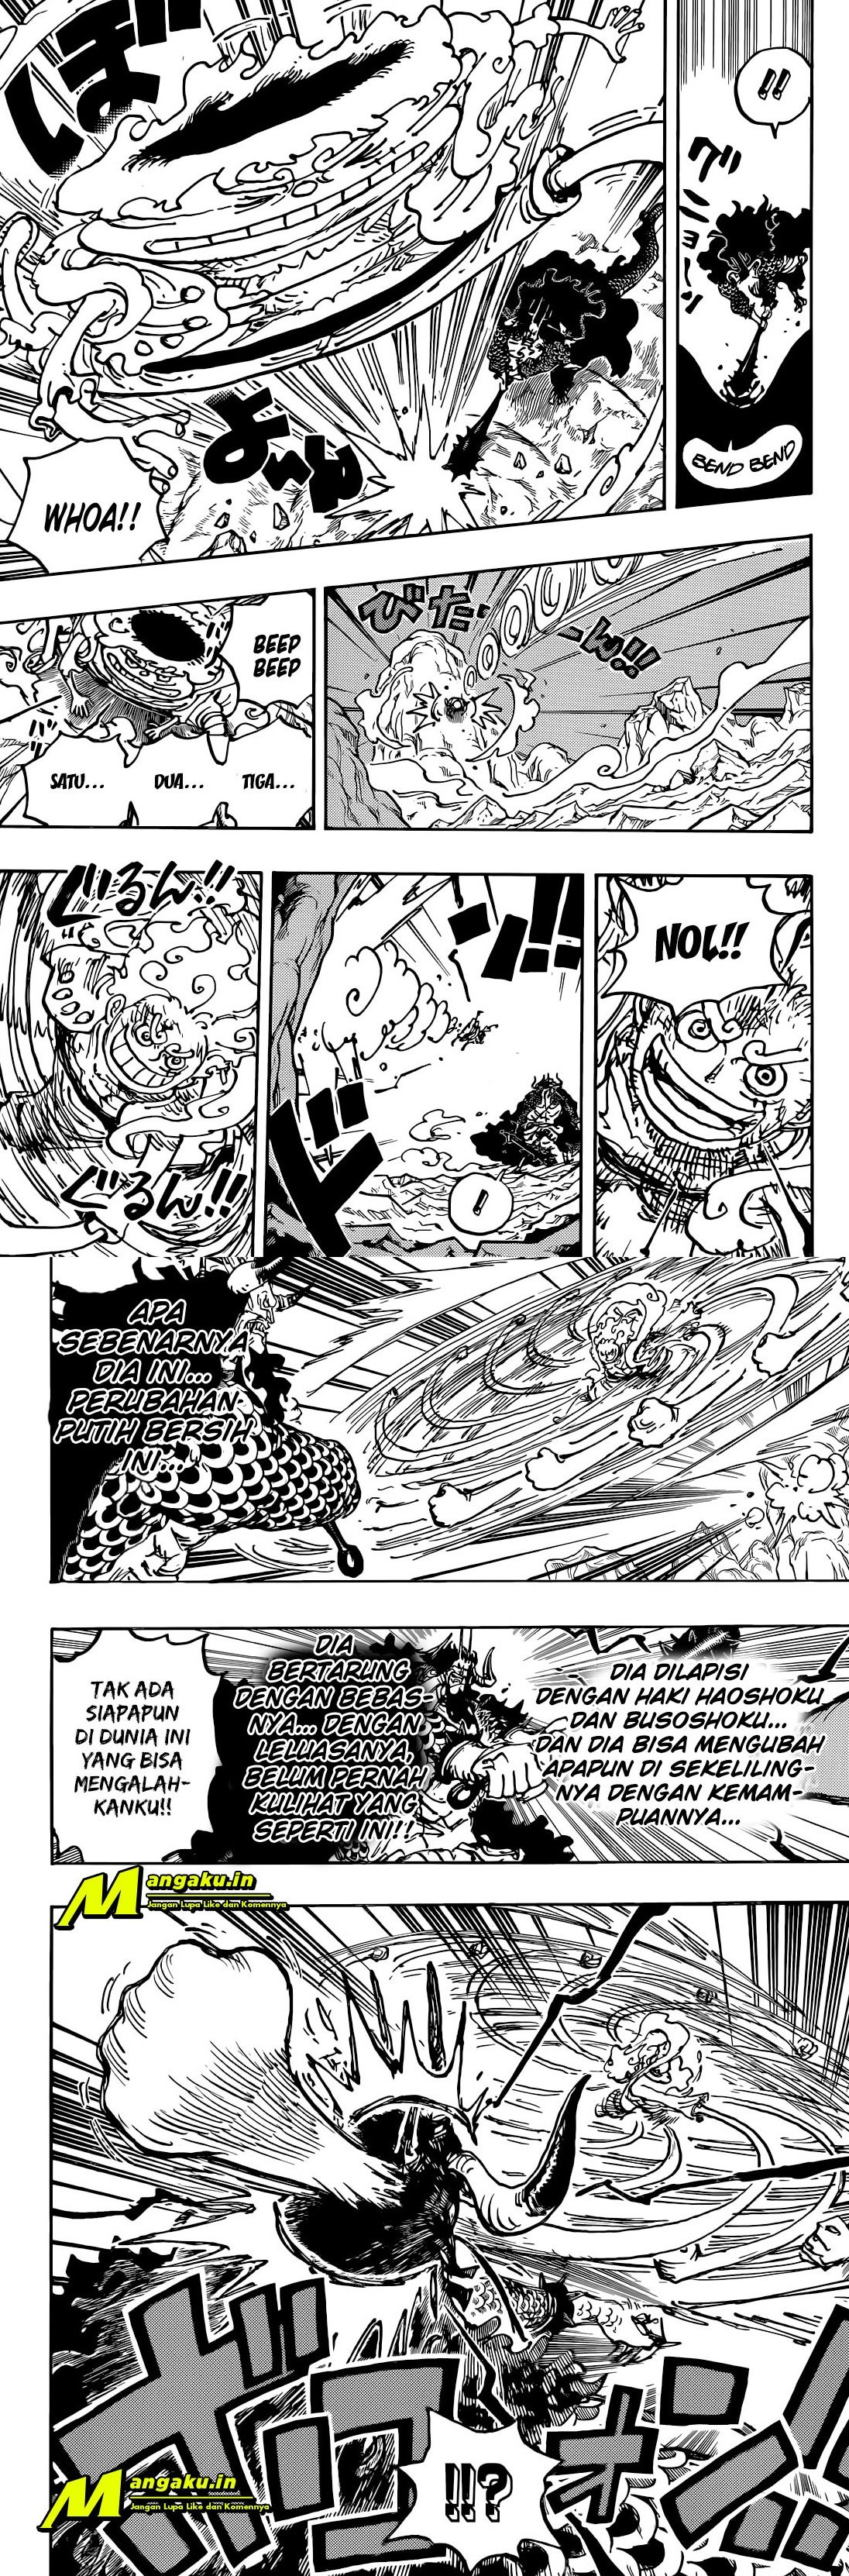 One Piece Chapter 1045 hq